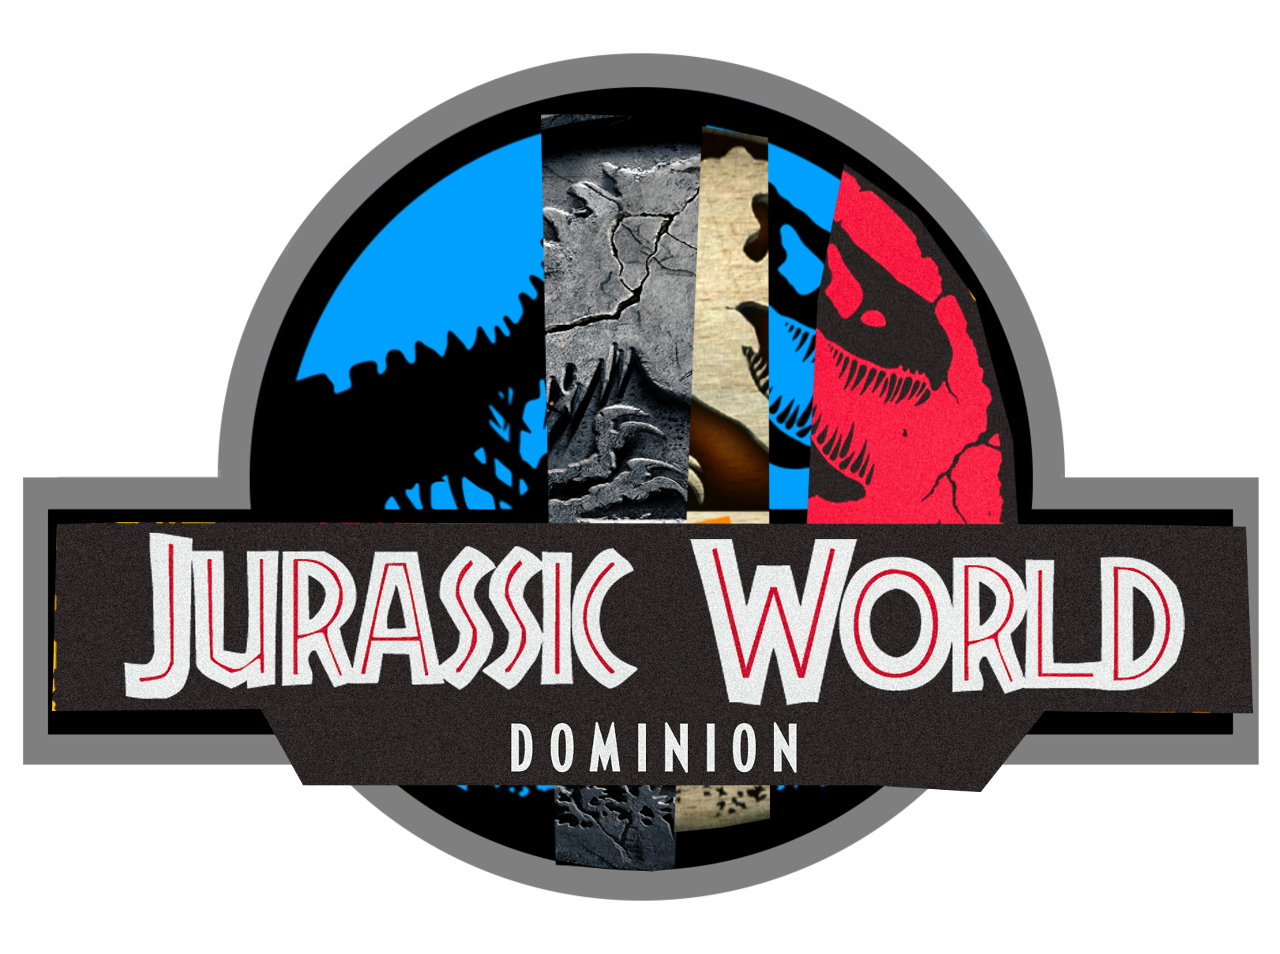 download the new for ios Jurassic World: Dominion